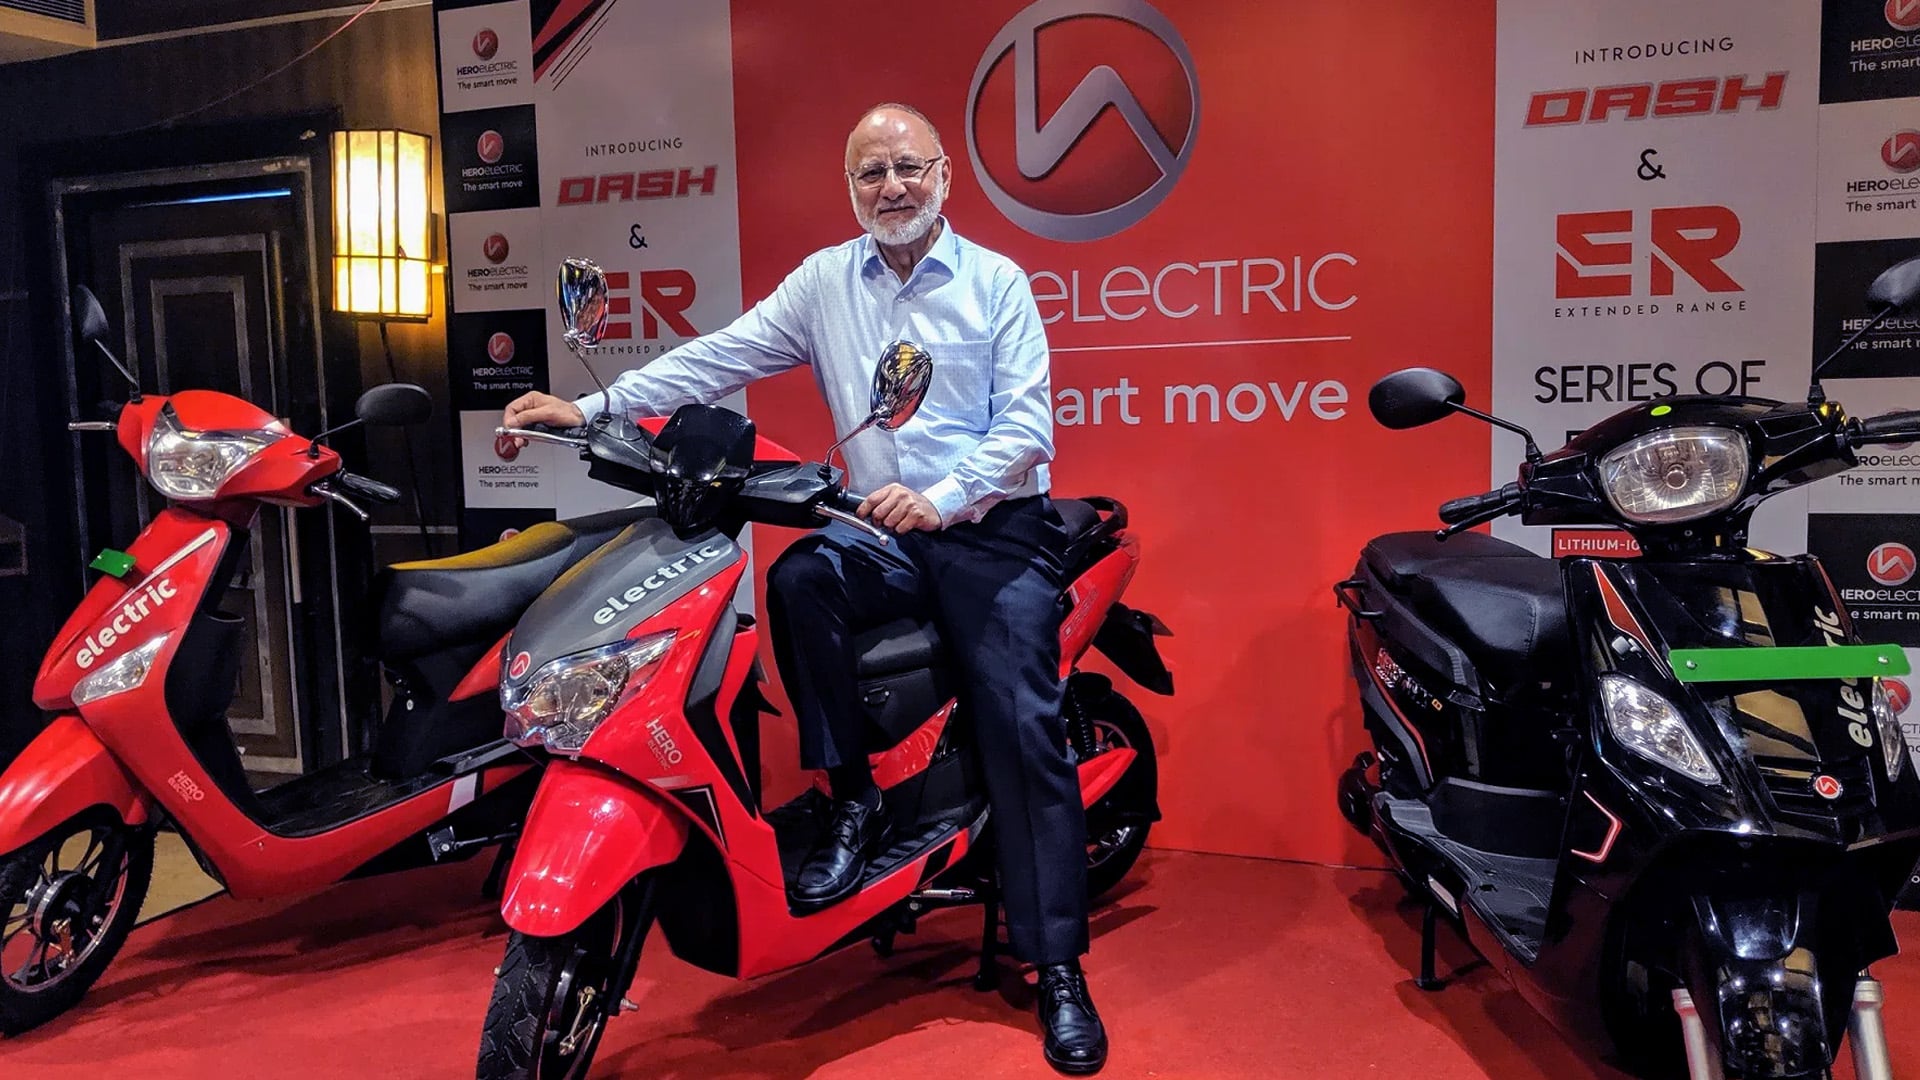 Hero reduces electric scooter prices by up to 33% after enhanced subsidy